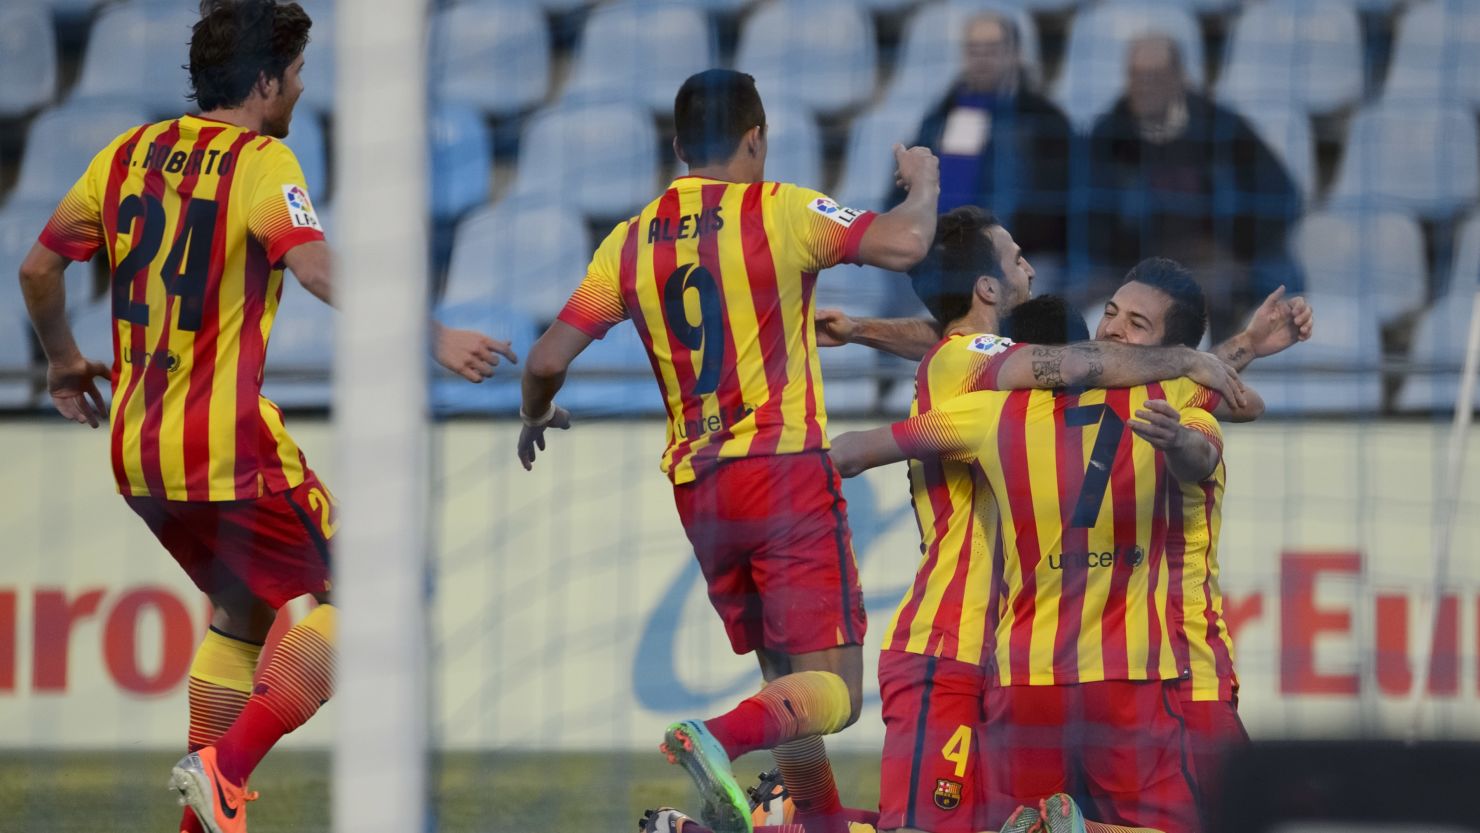 Barcelona had reason to celebrate Sunday, coming back to beat Getafe 5-2 to return to the summit in La Liga. 